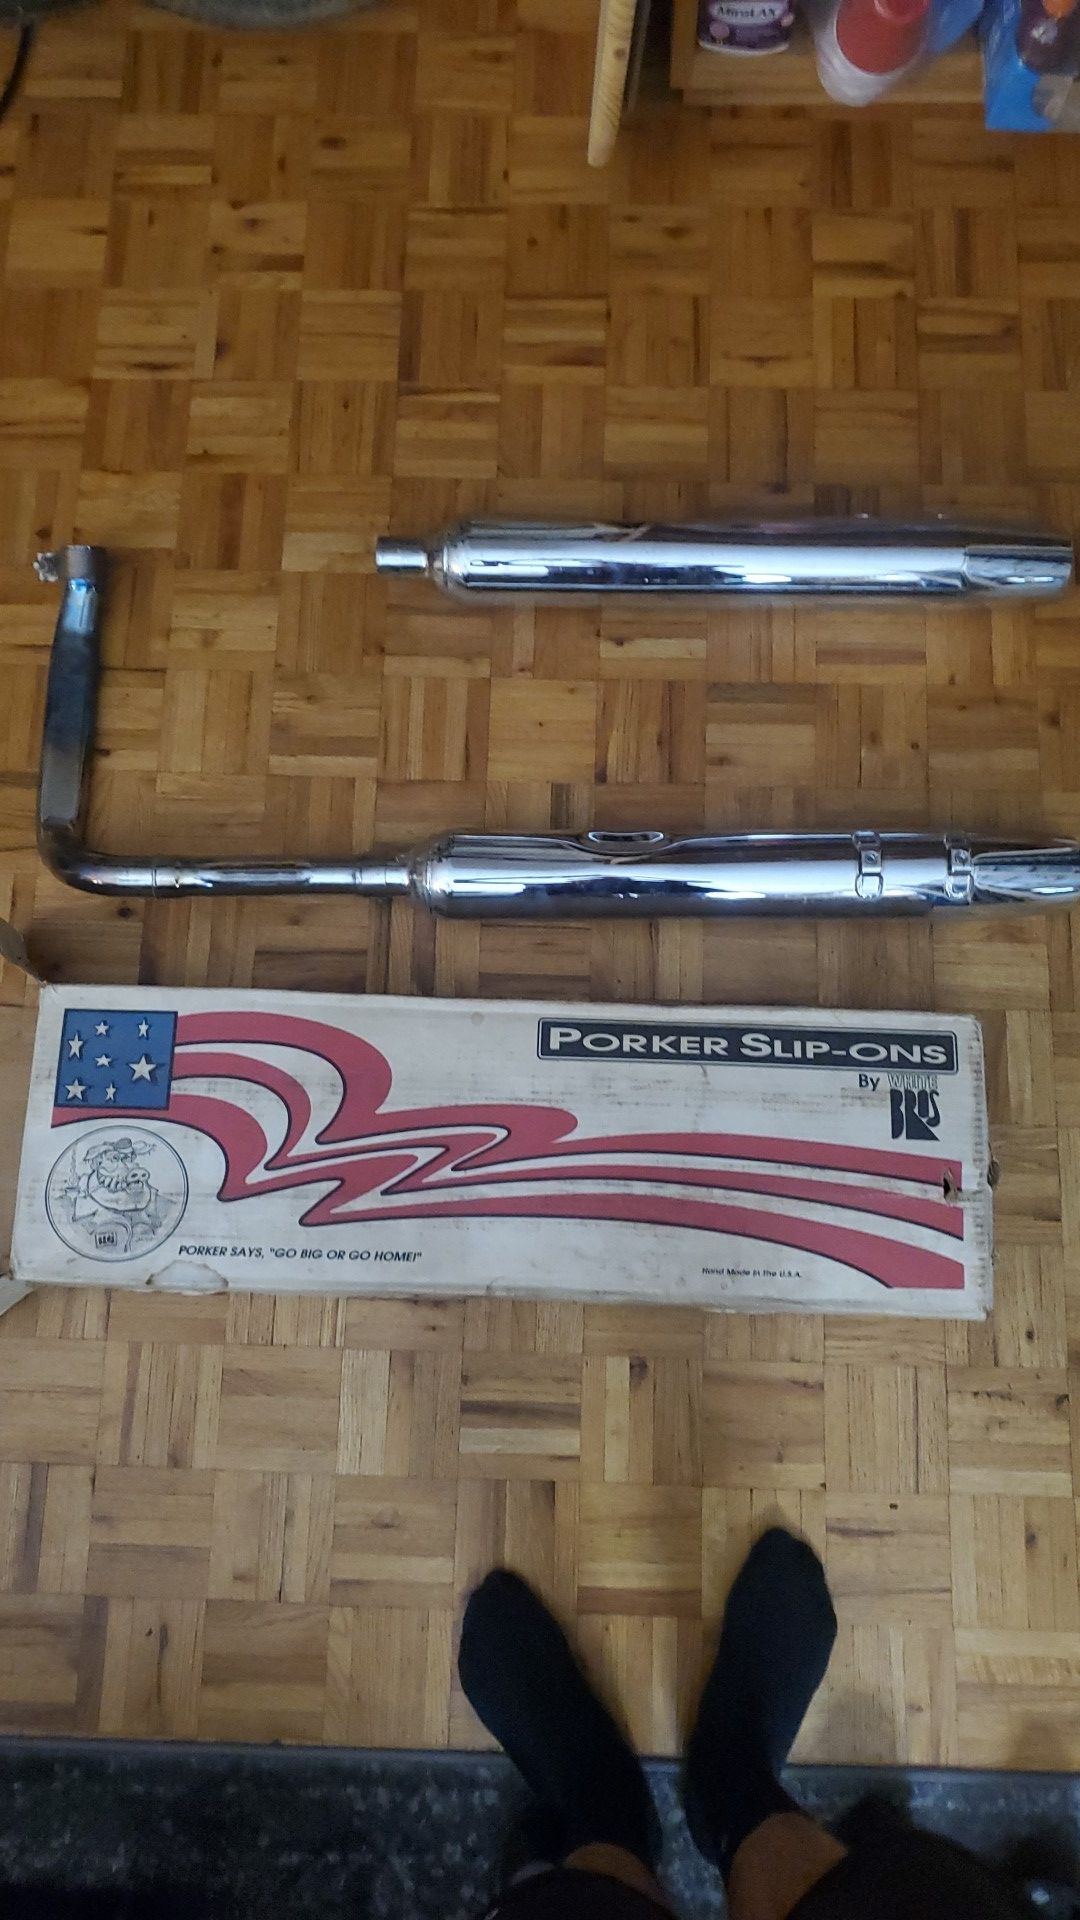 Harley exhaust system